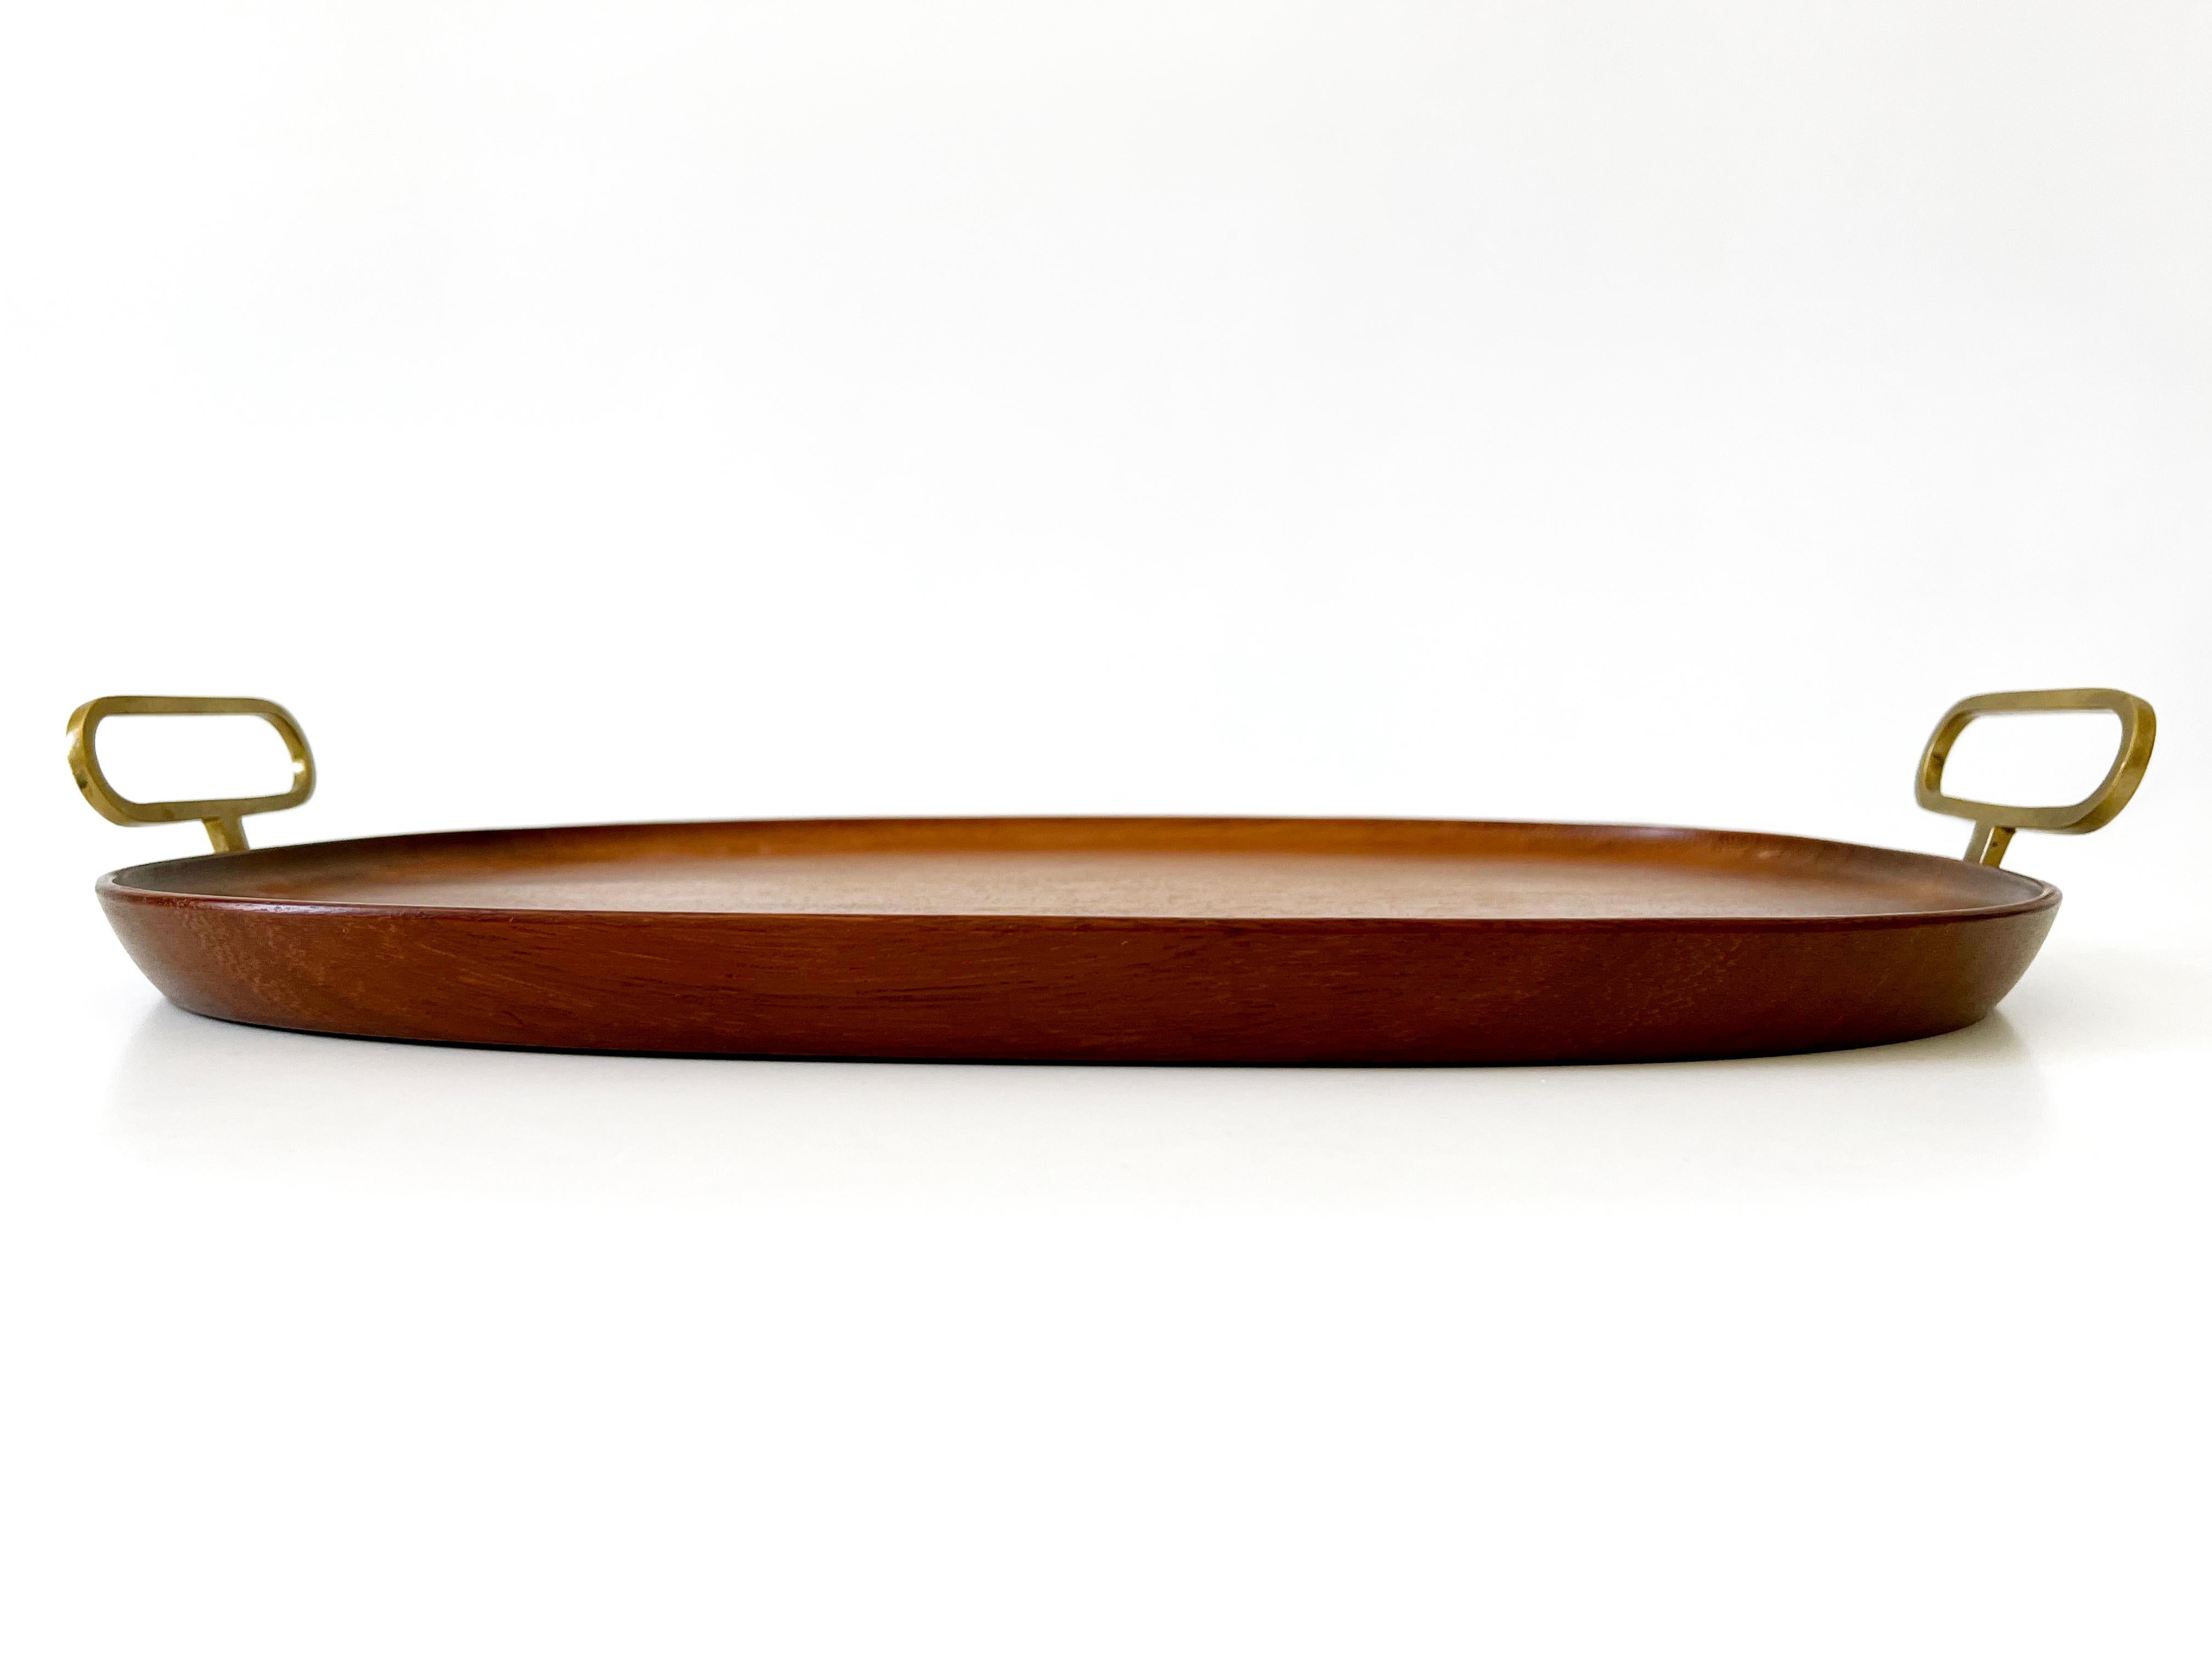 Extremely Rare Mid-Century Modern Teak Serving Tray by Carl Auböck Austria 1950s For Sale 1